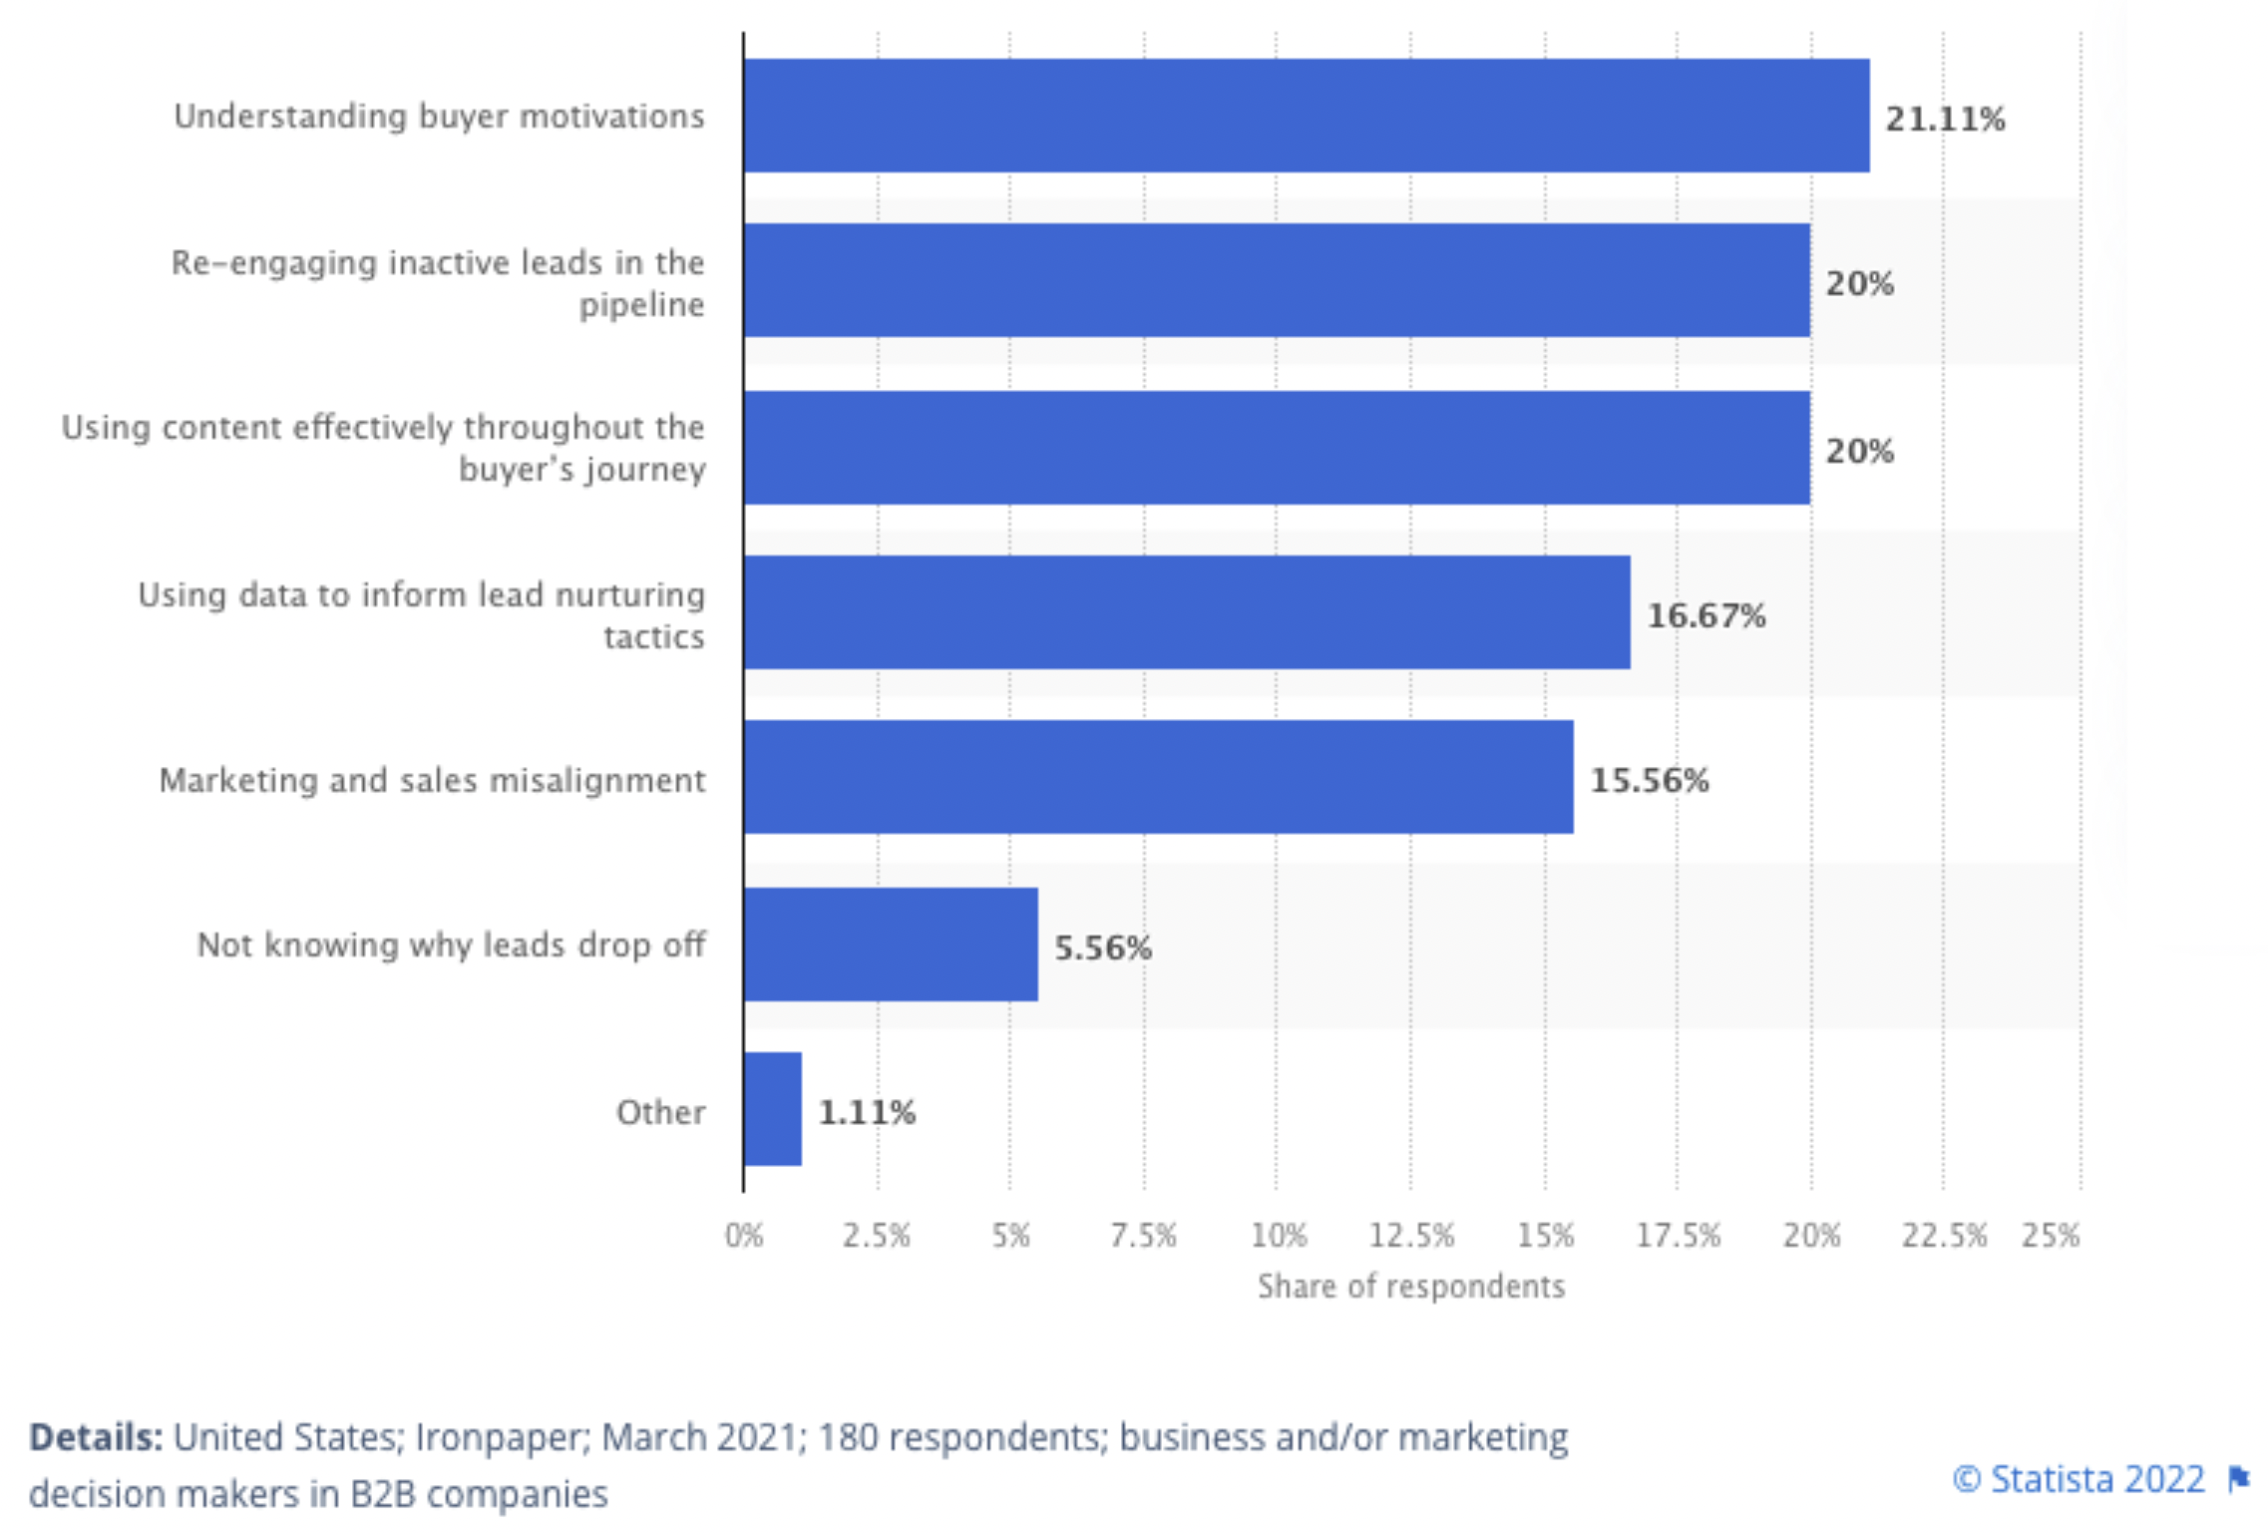 Horizontal bar chart showing challenges in nurturing leads; top three are understanding buyer motivations, 21%; engaging inactive leads, 20%; and using content effectively throughout the buyers journey, 20%.